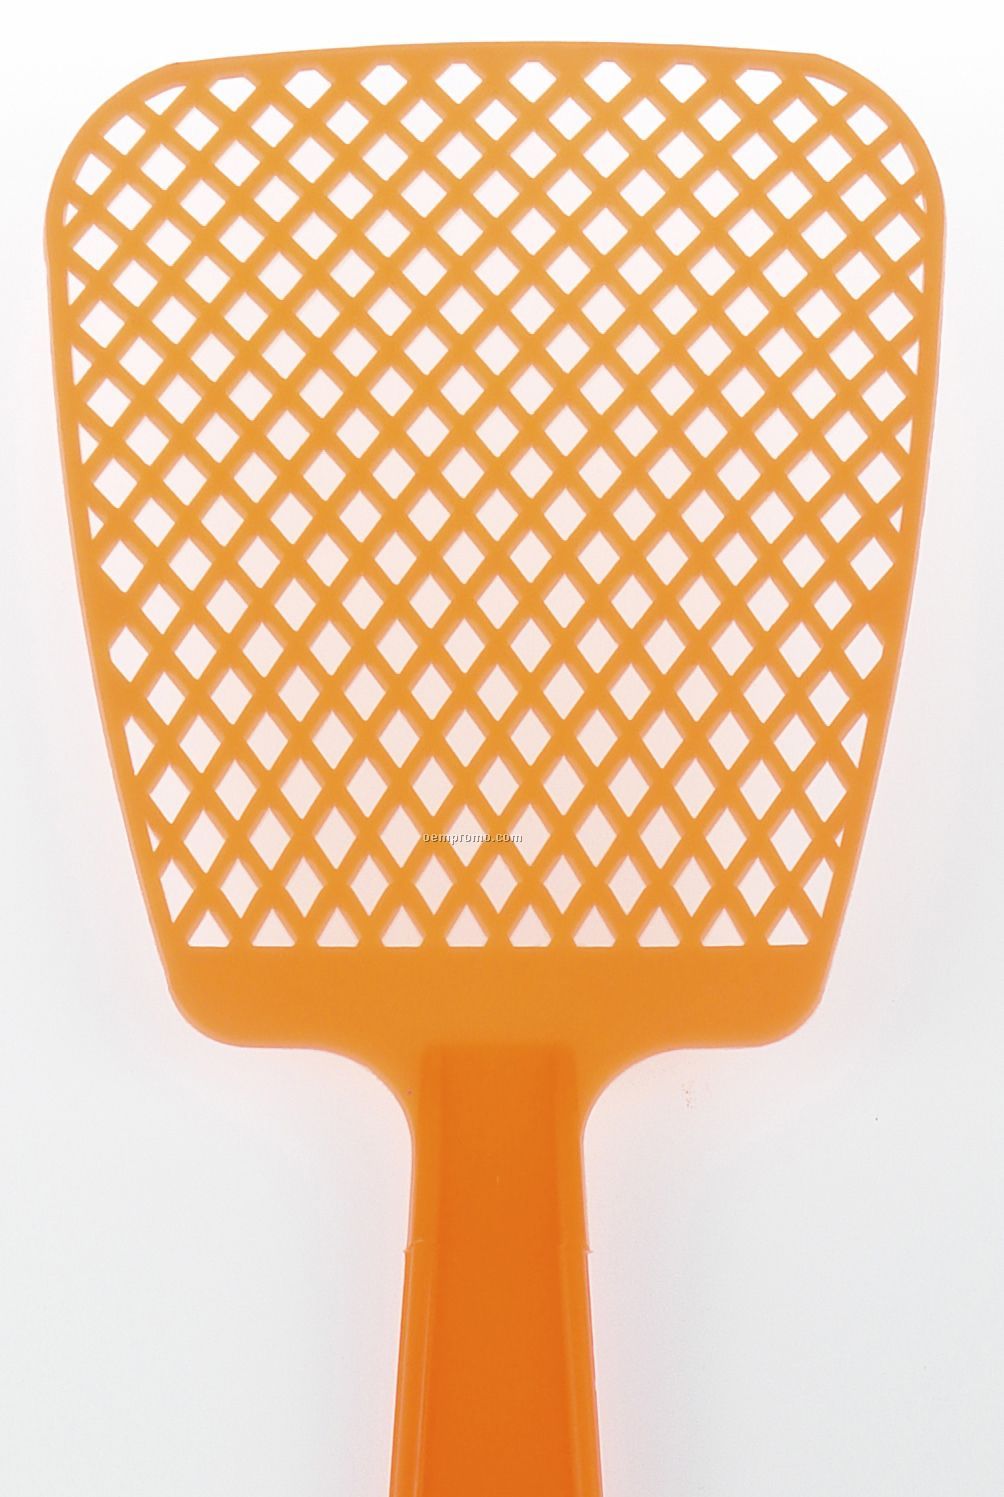 fly swatter clipart - photo #49